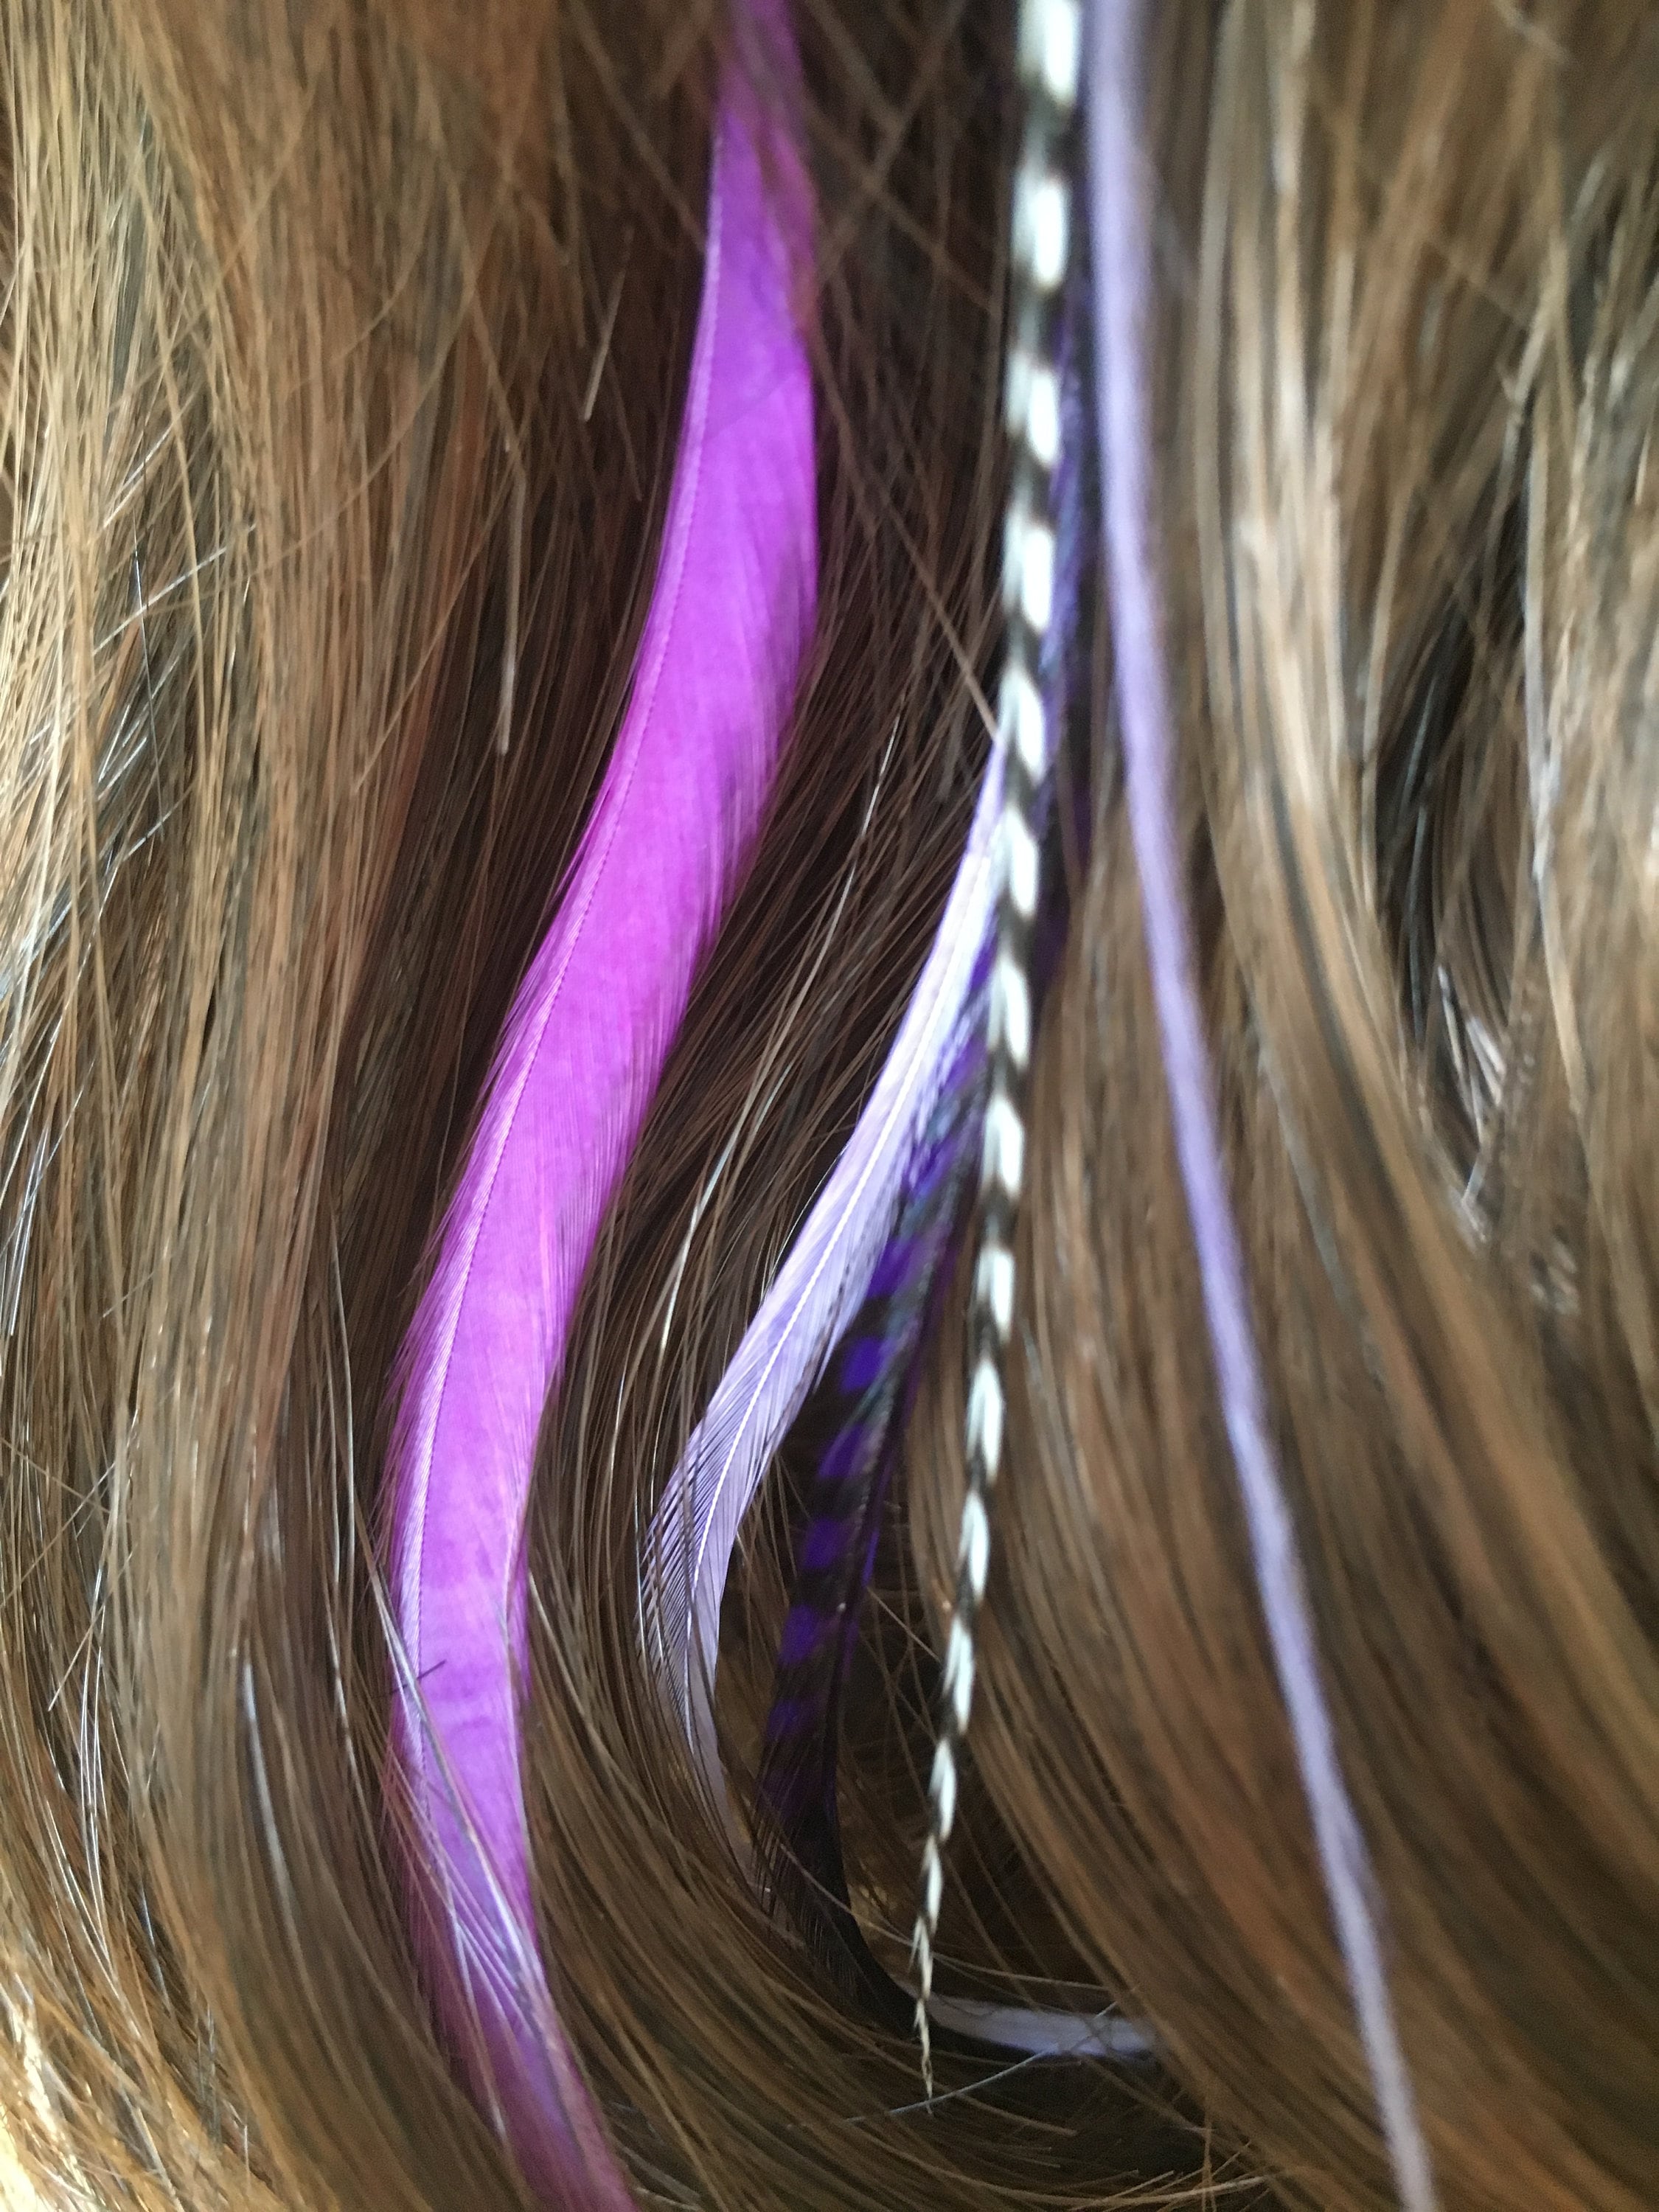 Feather Hair Extension Kit: 5 Natural Bonded Thin, Wispy Rooster Feathers with 3 Hair Crimps and Hair Threader. Natural and Blue Colors.